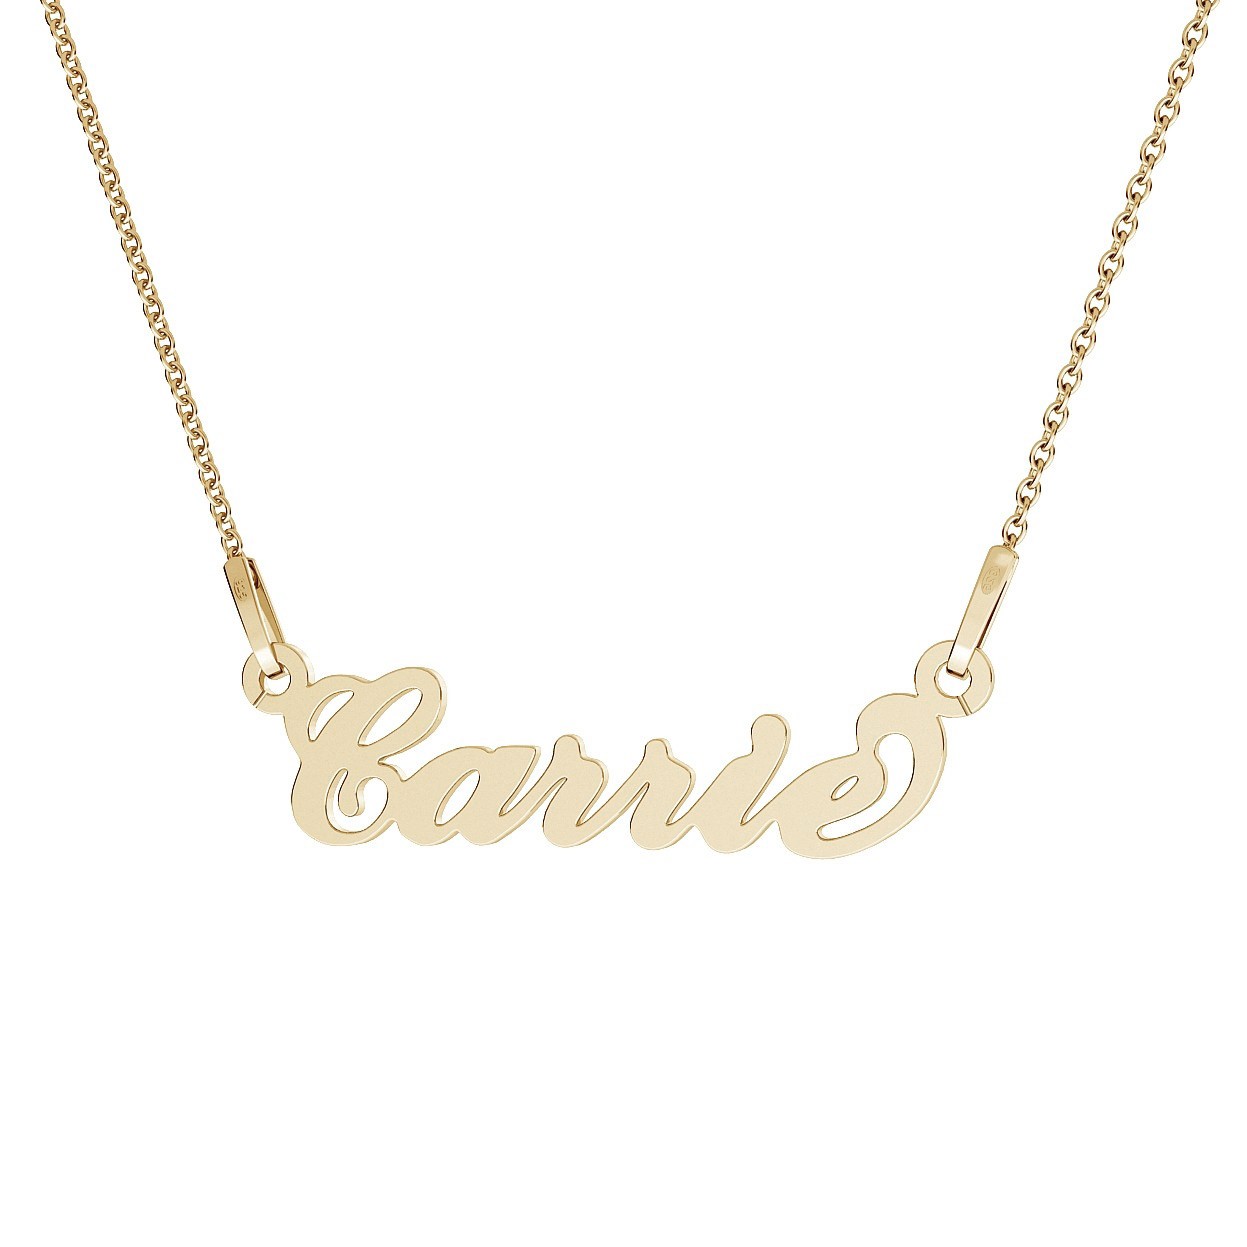 CARRIE STYLE NAME NECKLACE